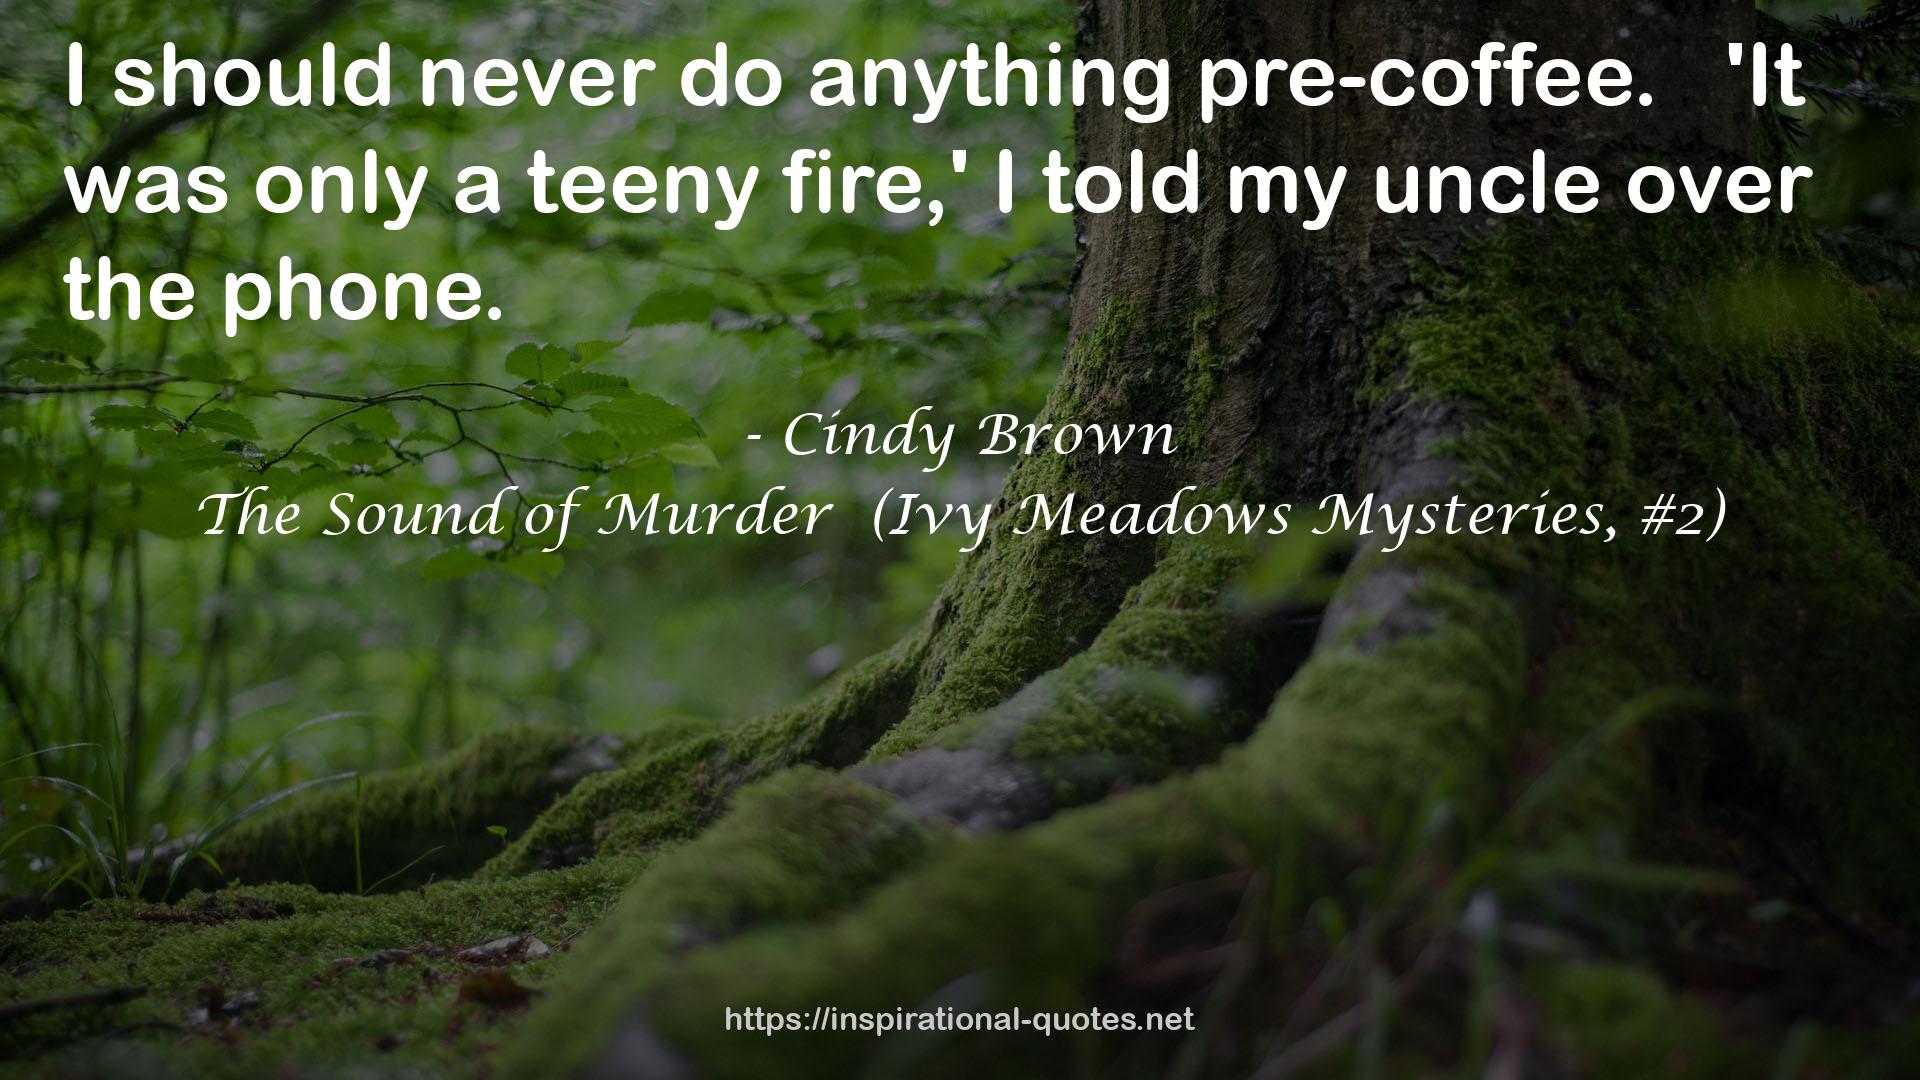 The Sound of Murder  (Ivy Meadows Mysteries, #2) QUOTES